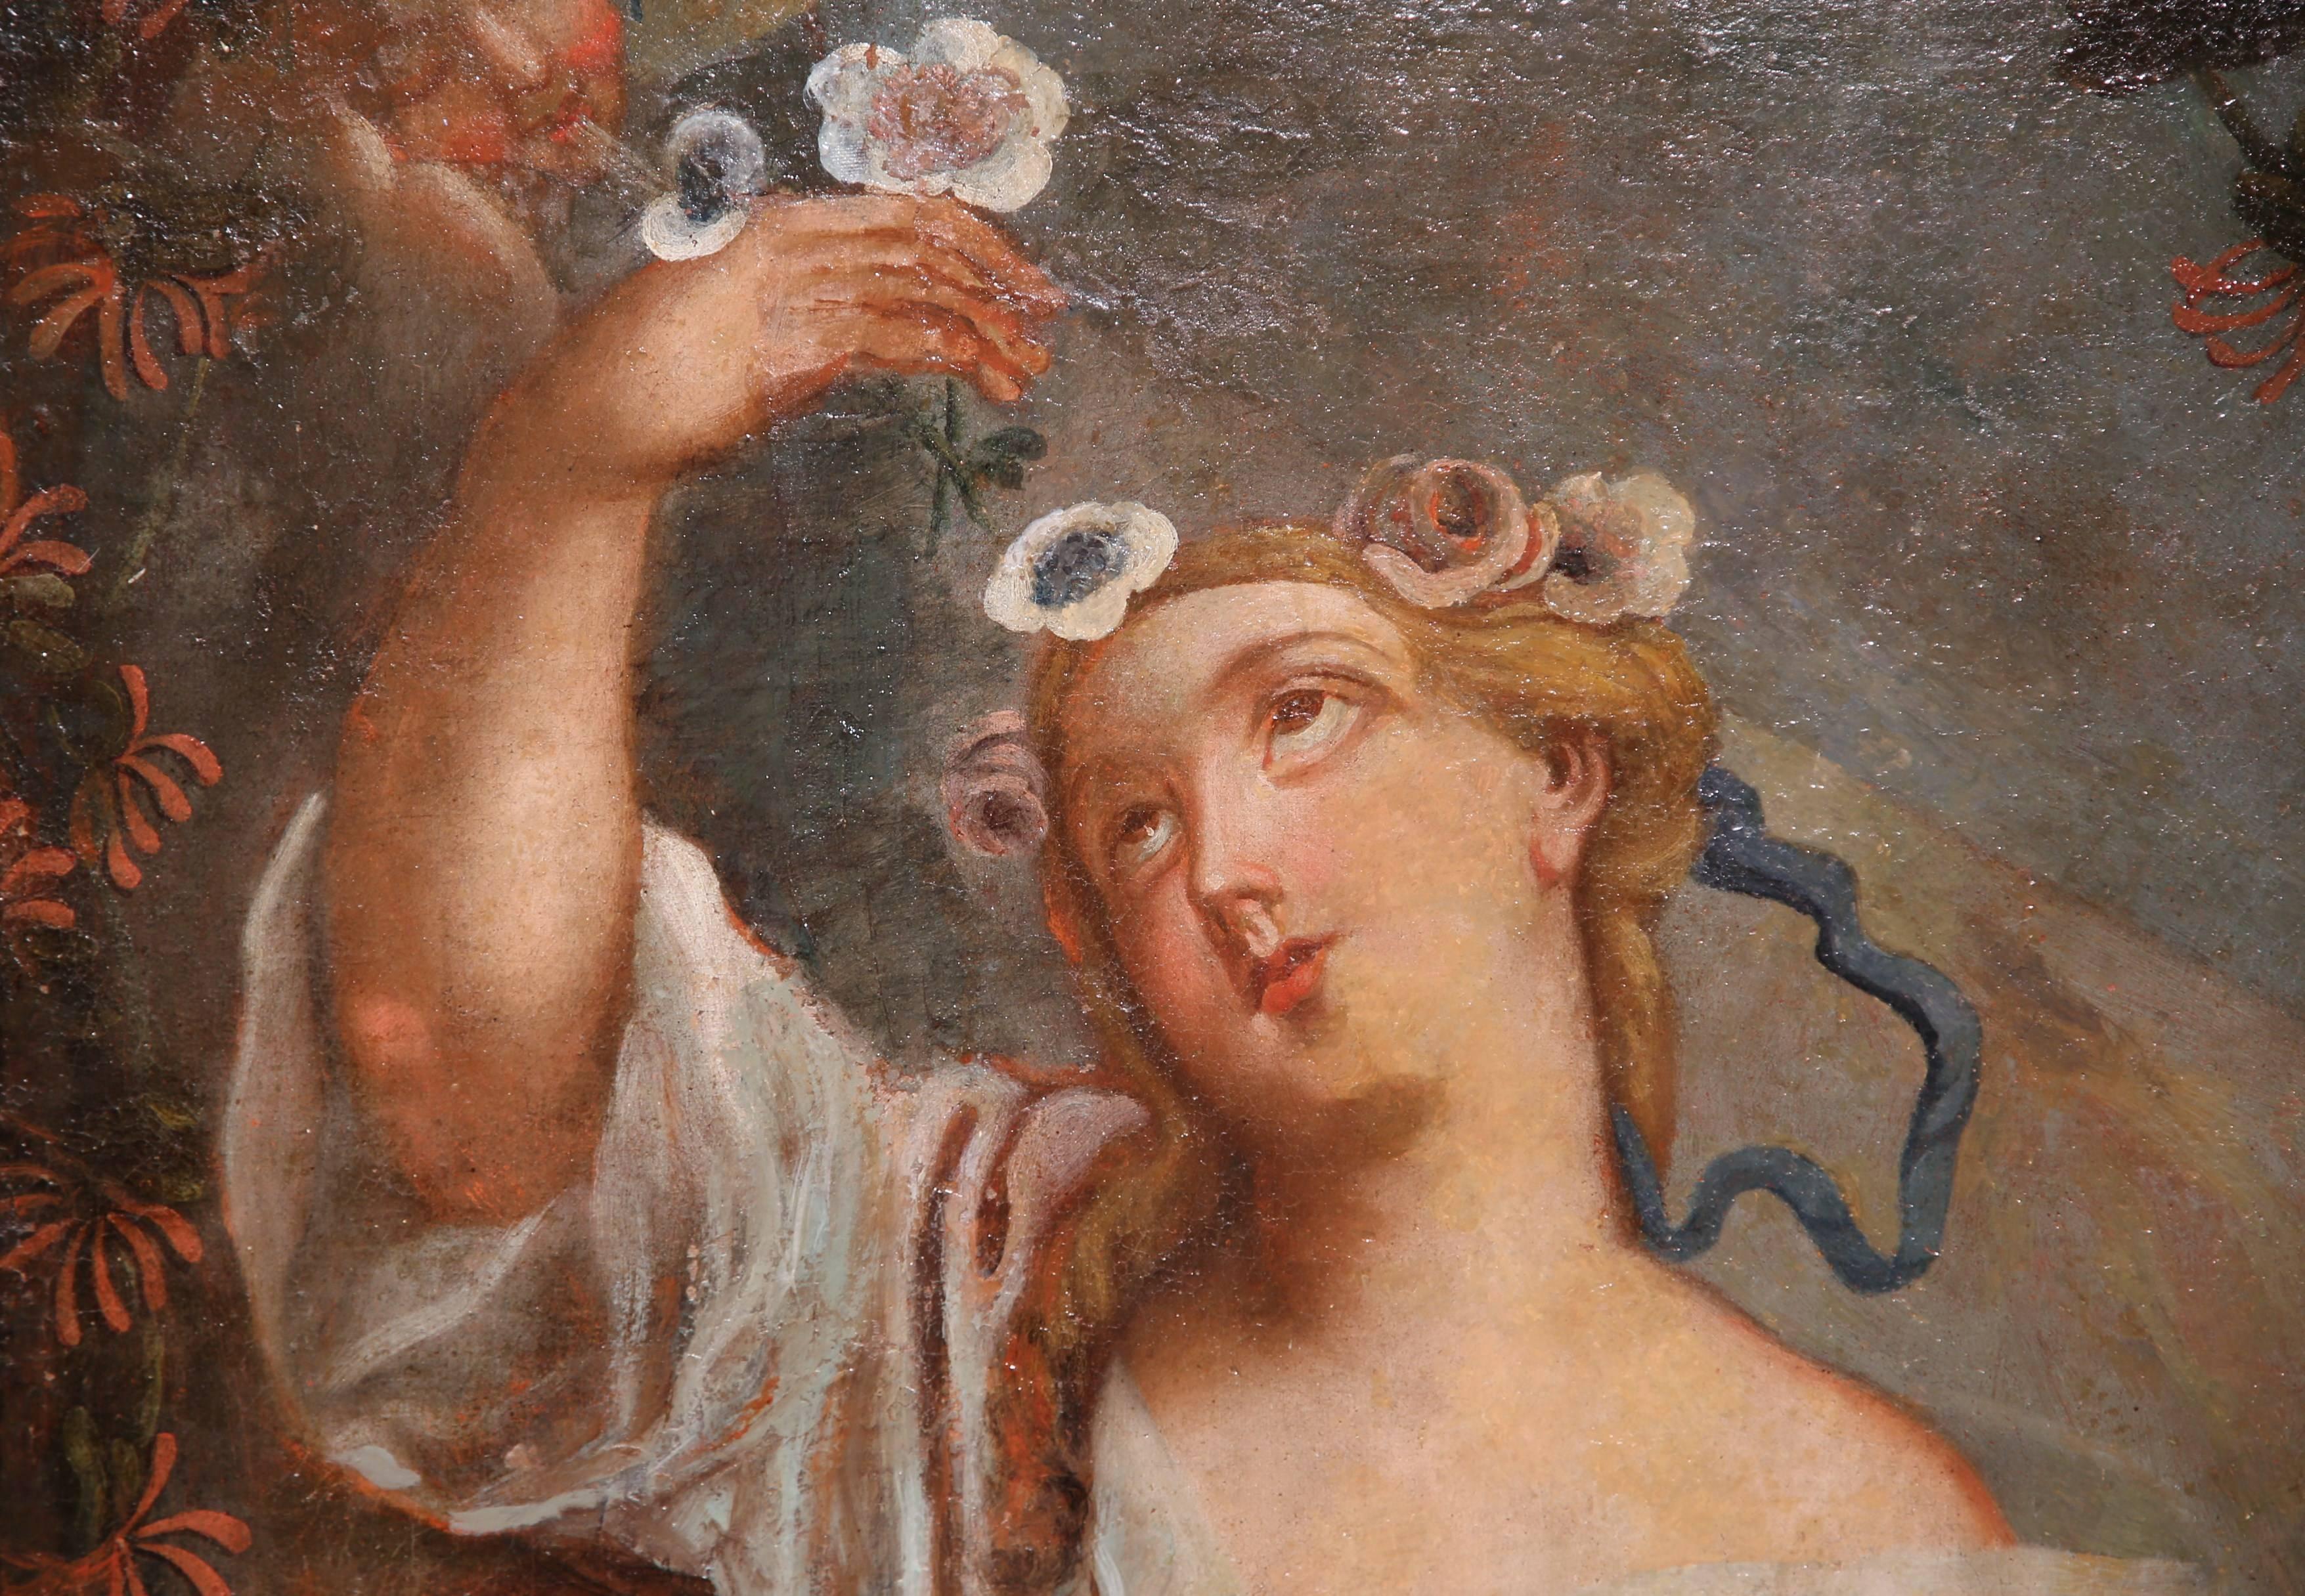 This beautiful, antique oil on canvas was painted in France circa 1720. The portrait depicts a young beauty holding flowers while a cherub watches from the sky. The painting has a beautiful rococo style, a soft pastel palette, and graceful facial